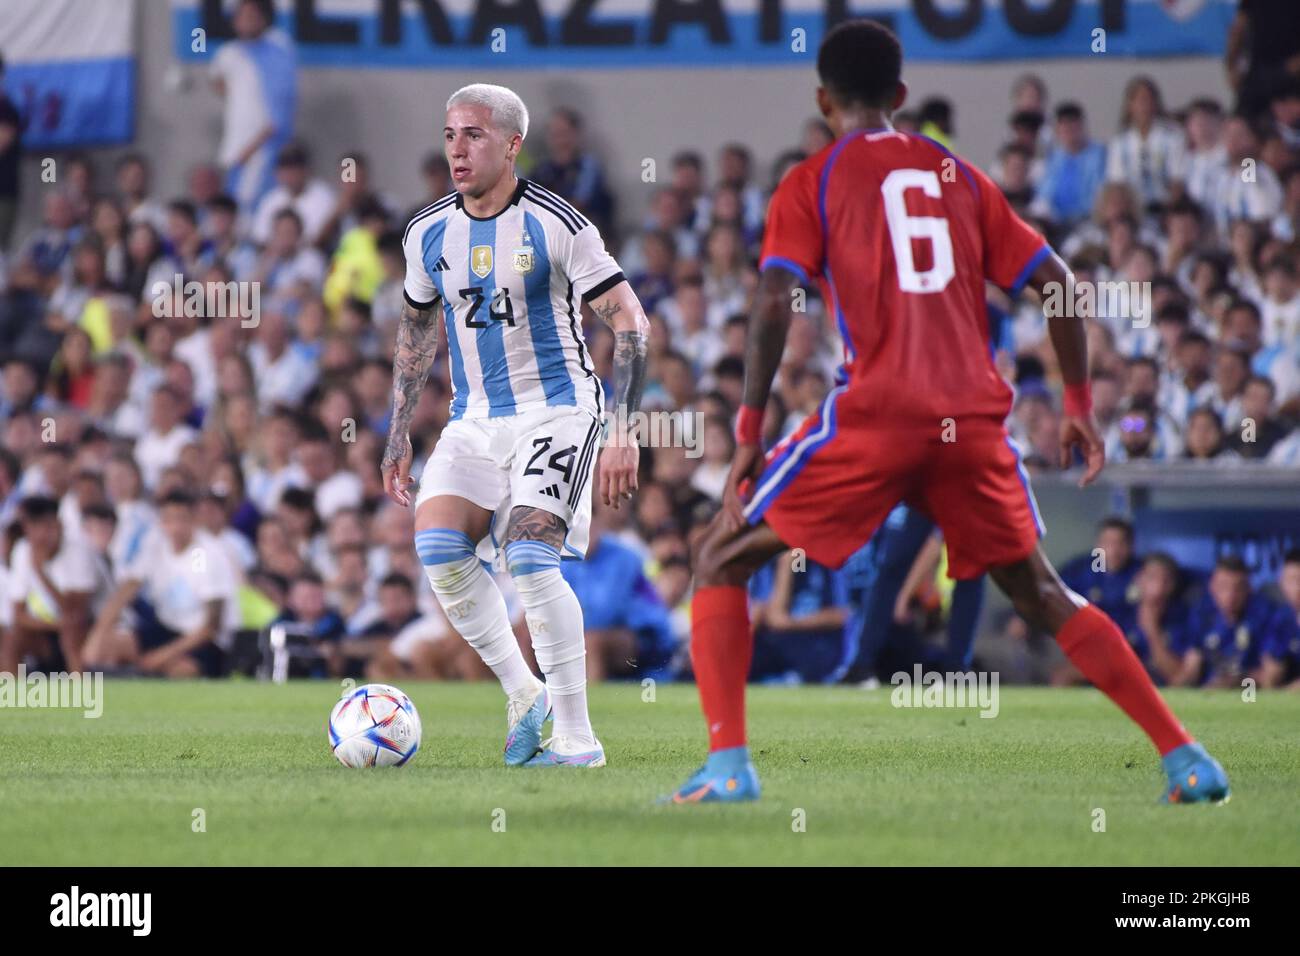 BUENOS AIRES, ARGENTINA - APRIL 23: Enzo Fernandez during a match between Argentina and Panama at Estadio Mas Monumental. Stock Photo